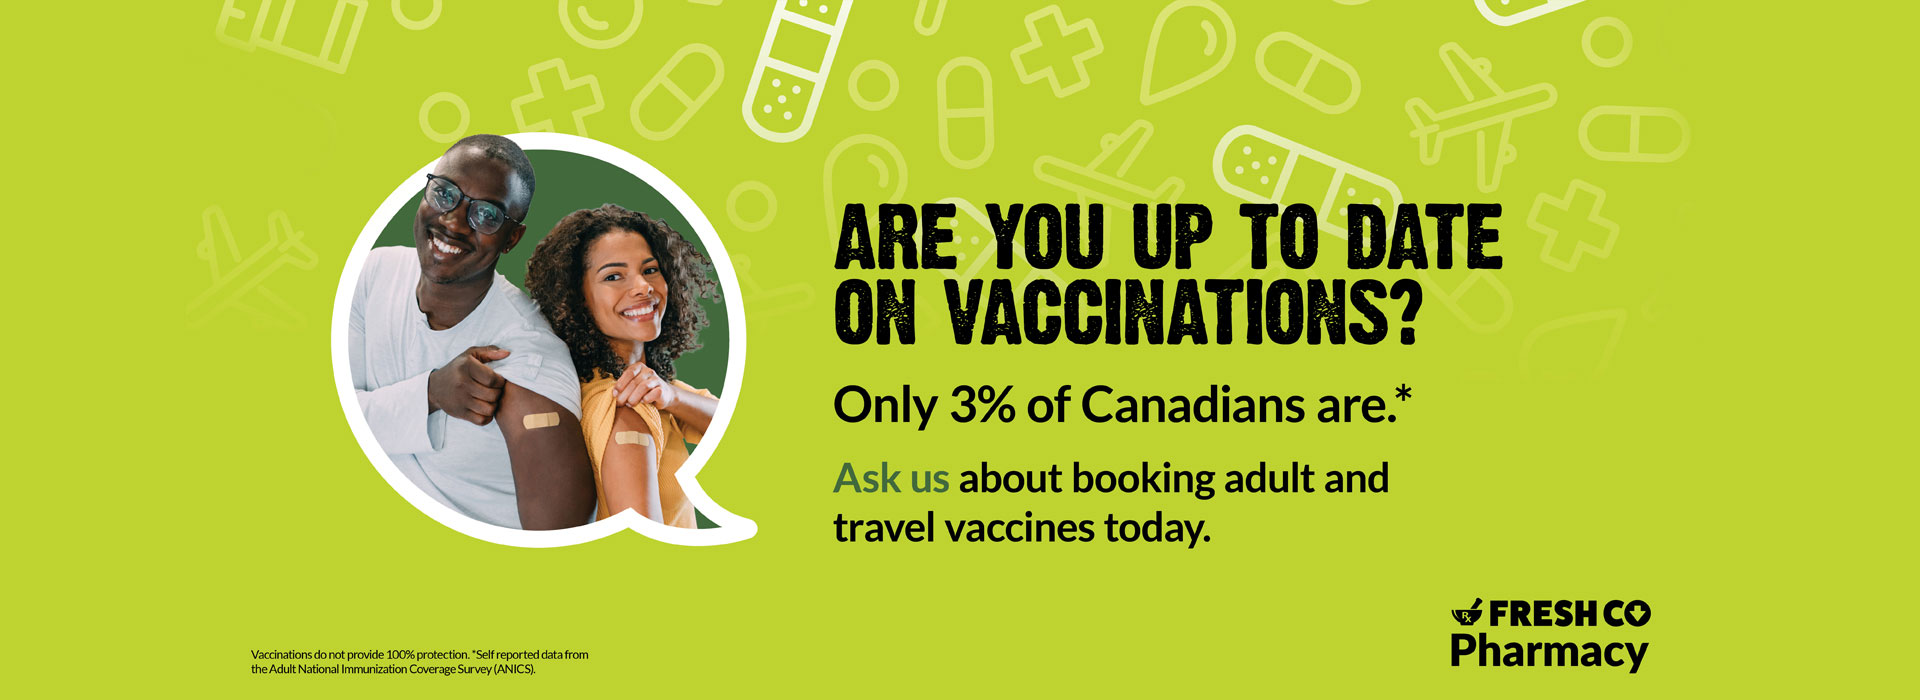 Text Reading 'Are you up to date on vaccination? Only 3% of Canadians are.* Ask us about Booking adult and travel vaccines today with Feshco Pharmacy.'